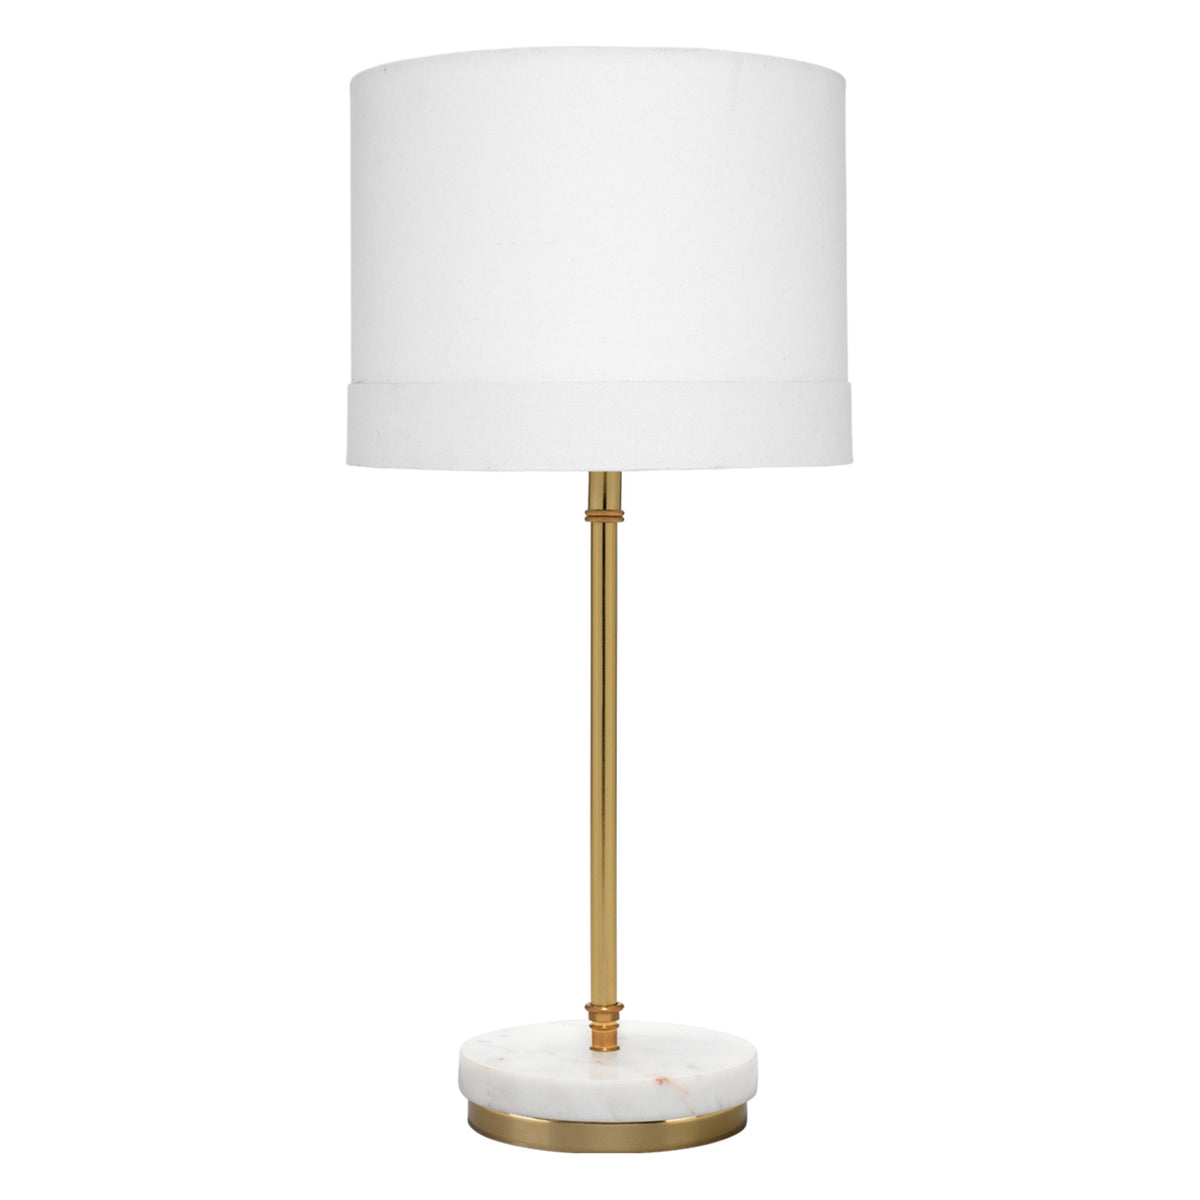 Jamie Young Company - LSGRACEBRWH - Grace Table Lamp - Grace - Antique Brass